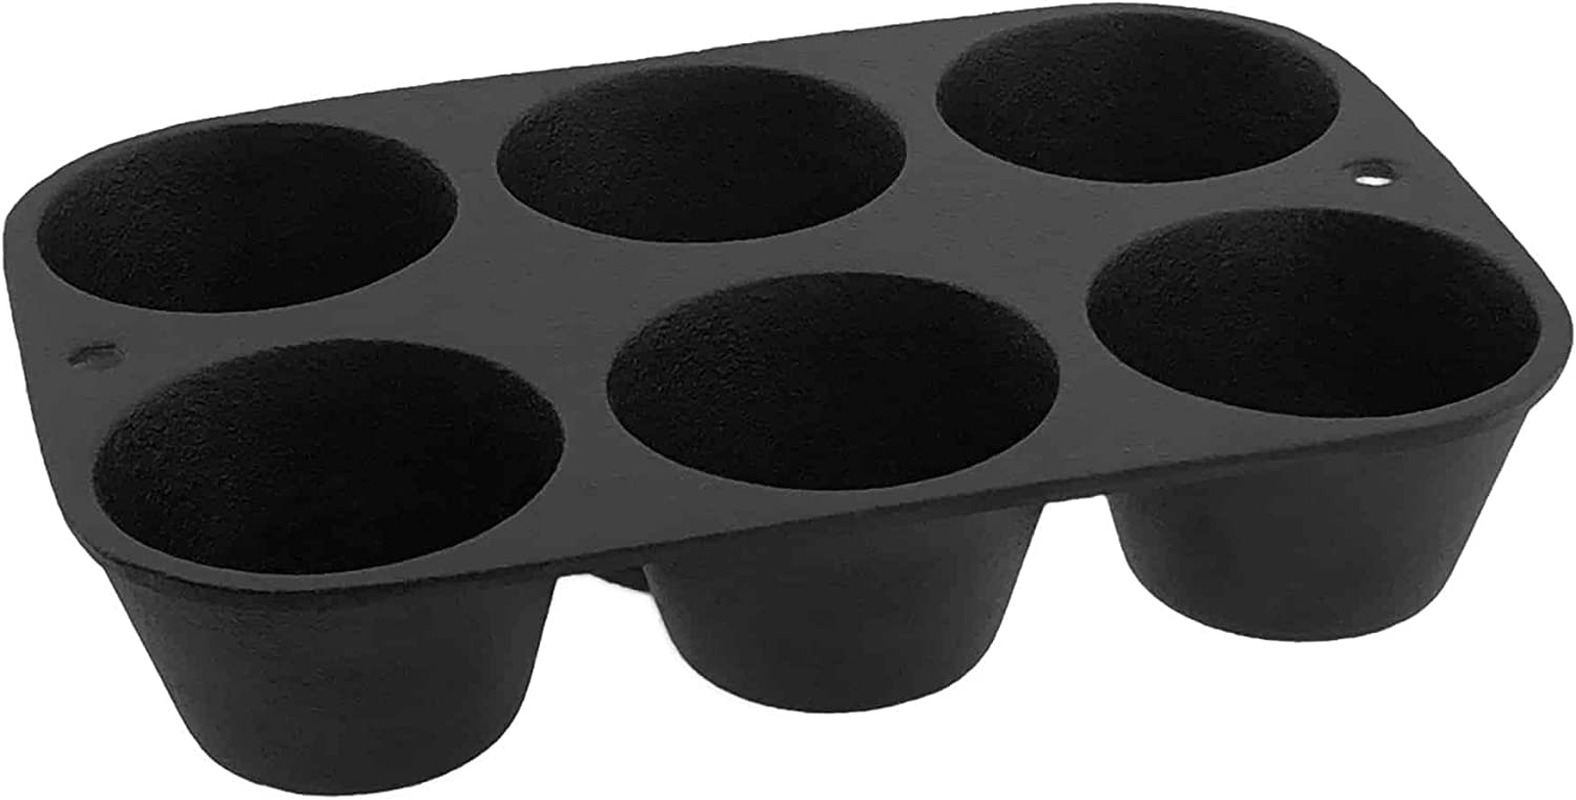 Old Mountain 10122 Cast Iron Muffin Pan - 6 Impression